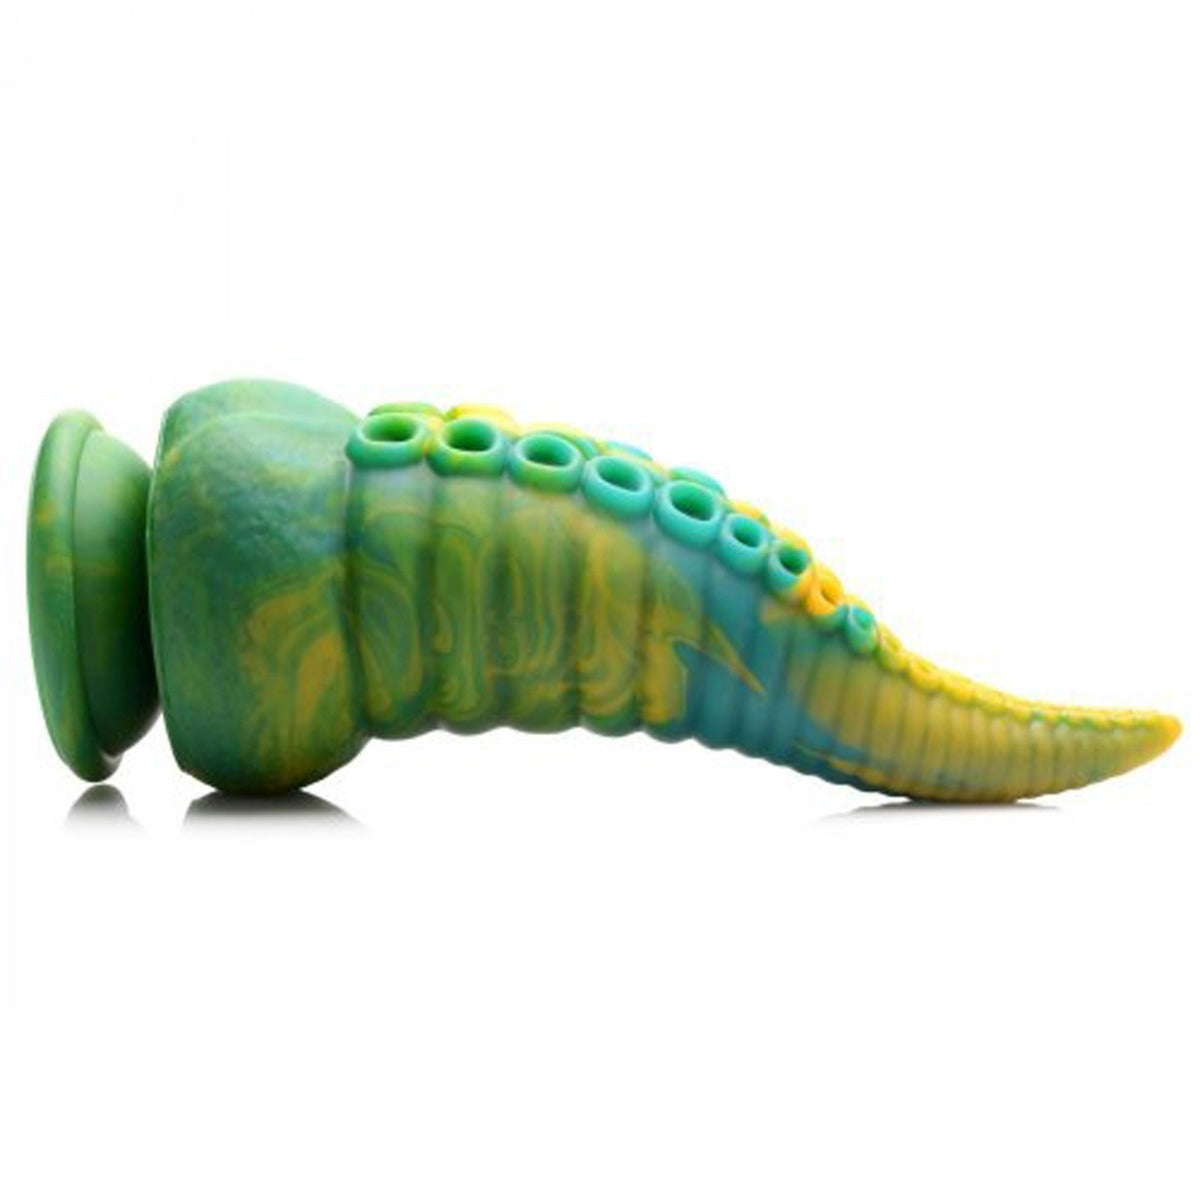 Creature Cocks Monstropus Tentacled Monster Silicone Dildo Yellow Green - Simply Pleasure